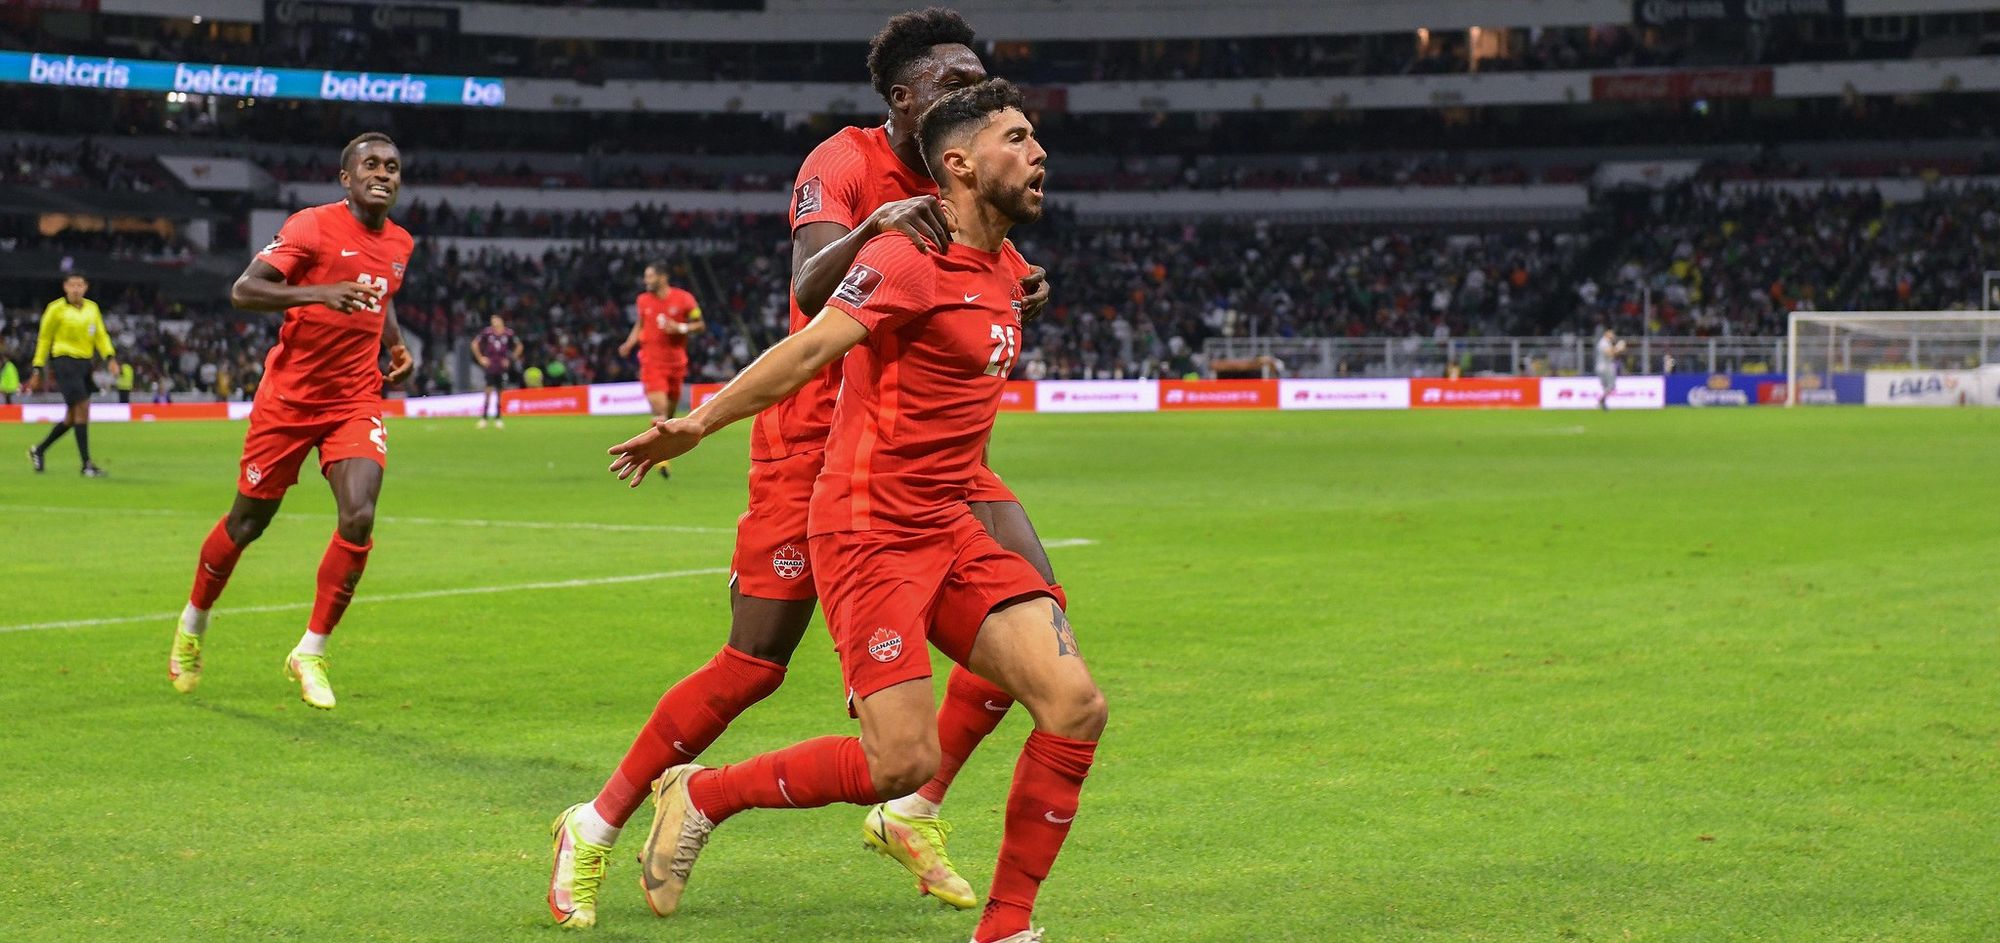 Canada vs. Costa Rica in World Cup qualifying: What you need to know